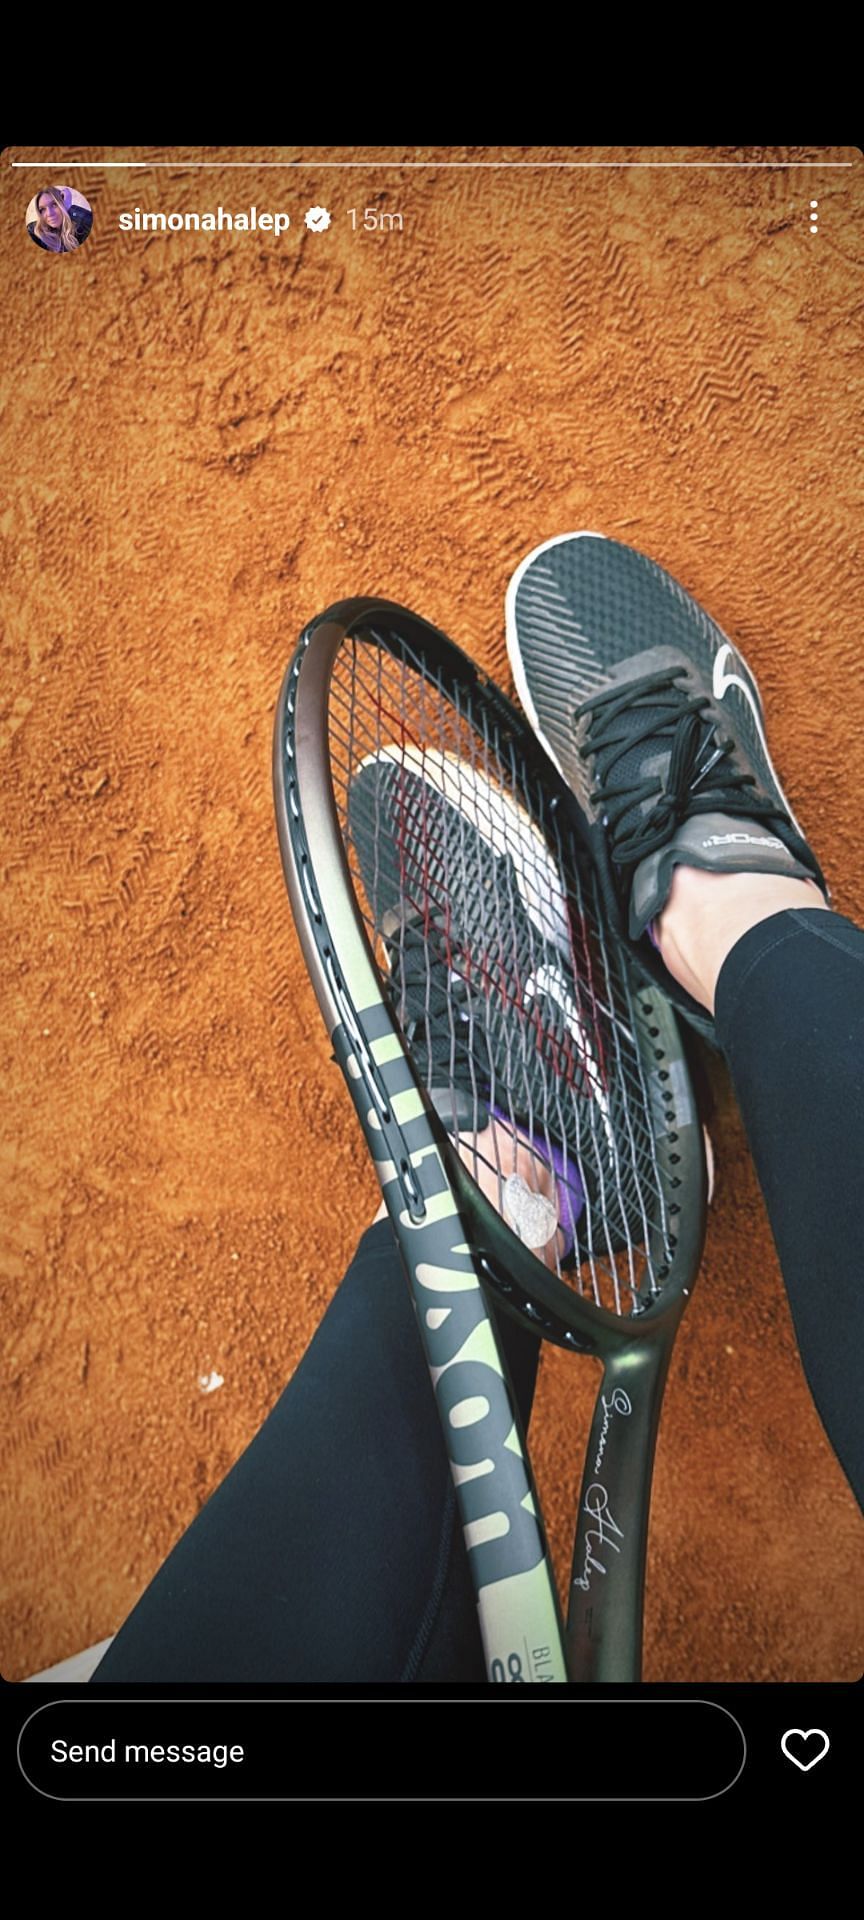 Simona Halep shares a picture while training for the first time in a few months on the tennis court